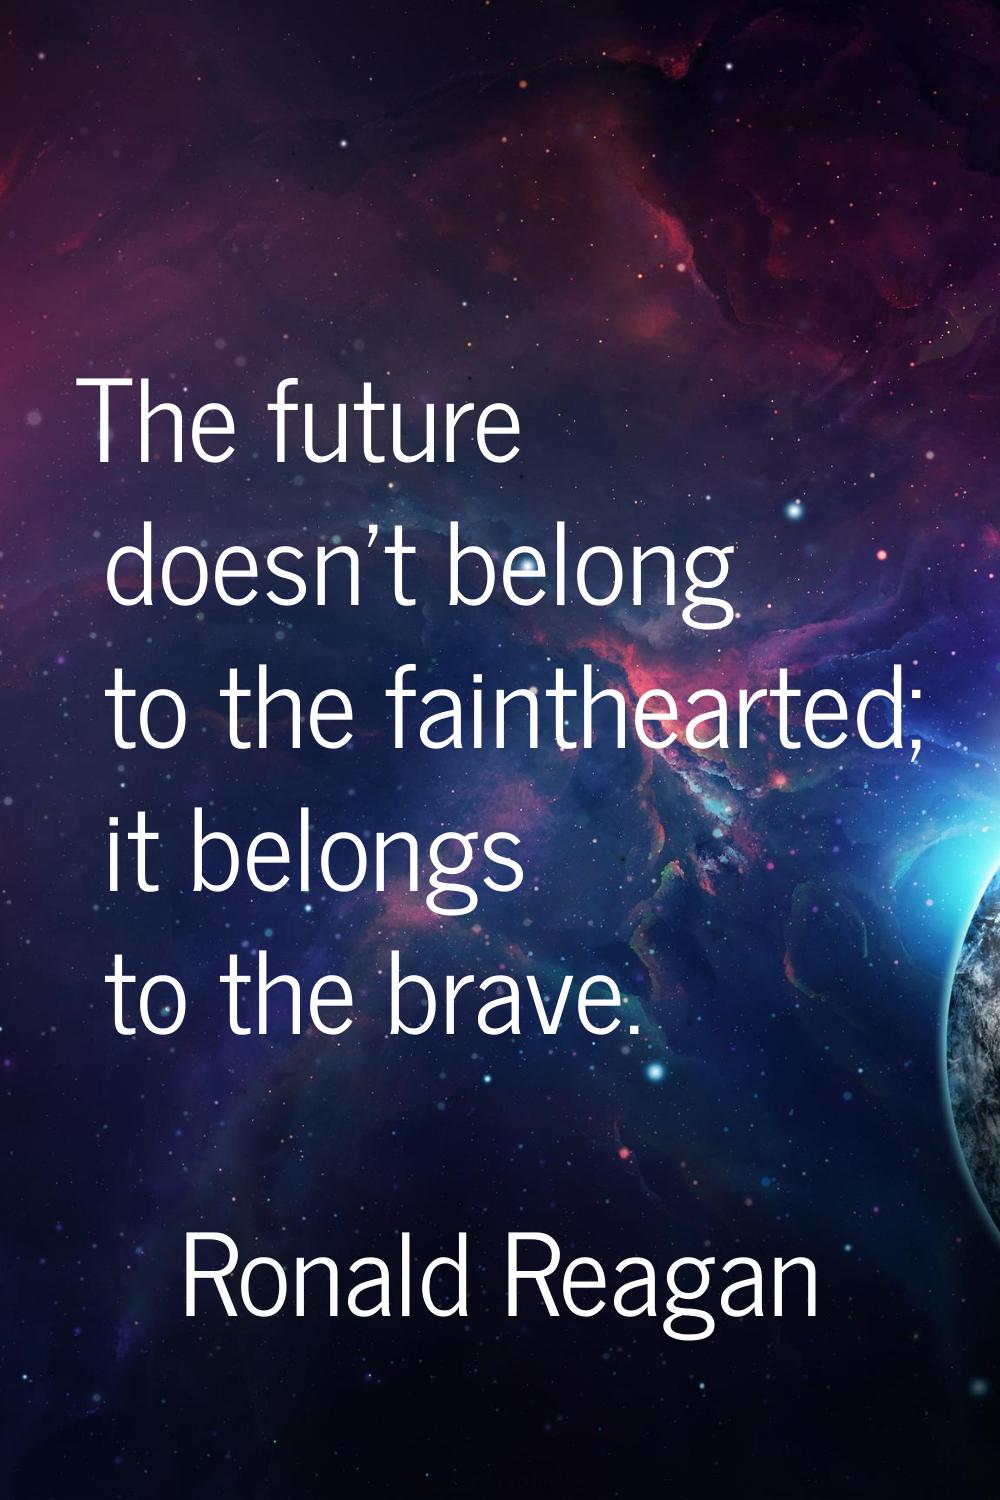 The future doesn't belong to the fainthearted; it belongs to the brave.